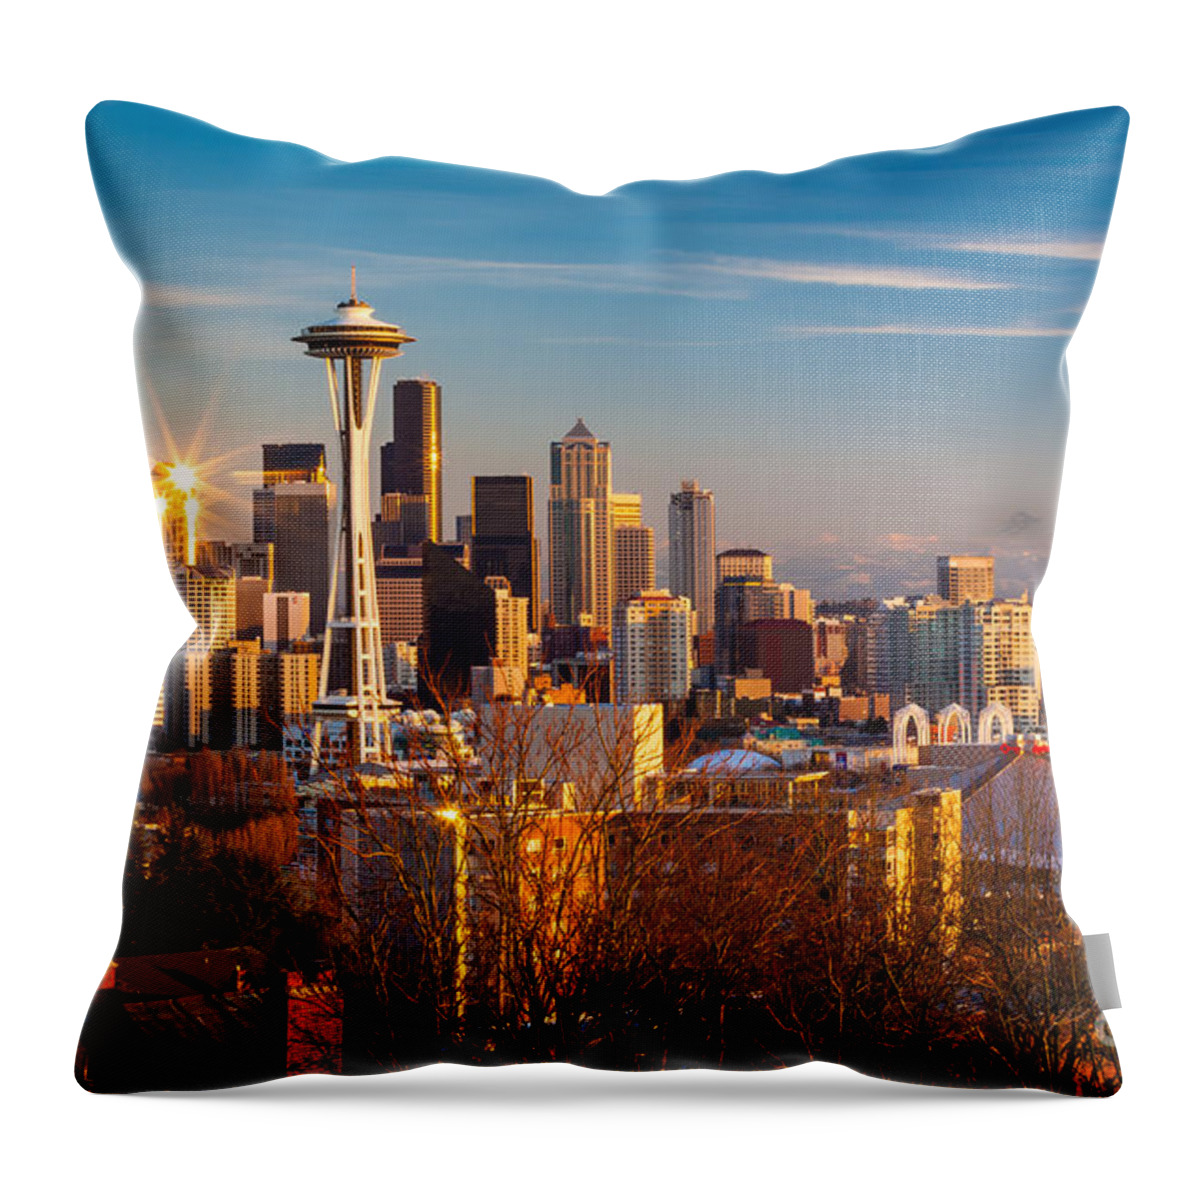 America Throw Pillow featuring the photograph Emerald City Sunset by Inge Johnsson